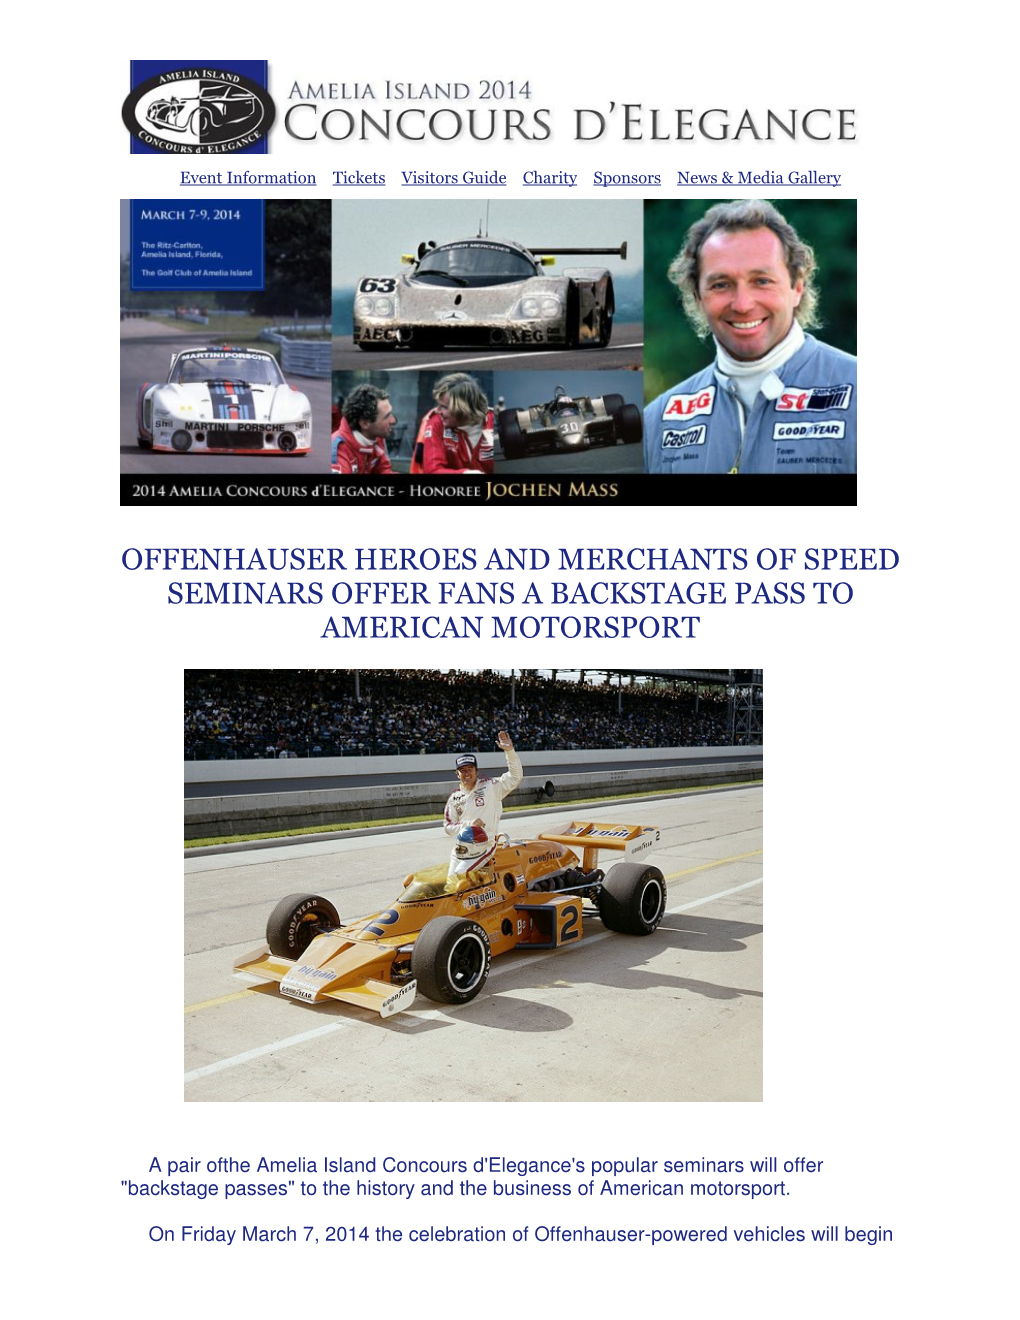 Offenhauser Heroes and Merchants of Speed Seminars Offer Fans a Backstage Pass to American Motorsport